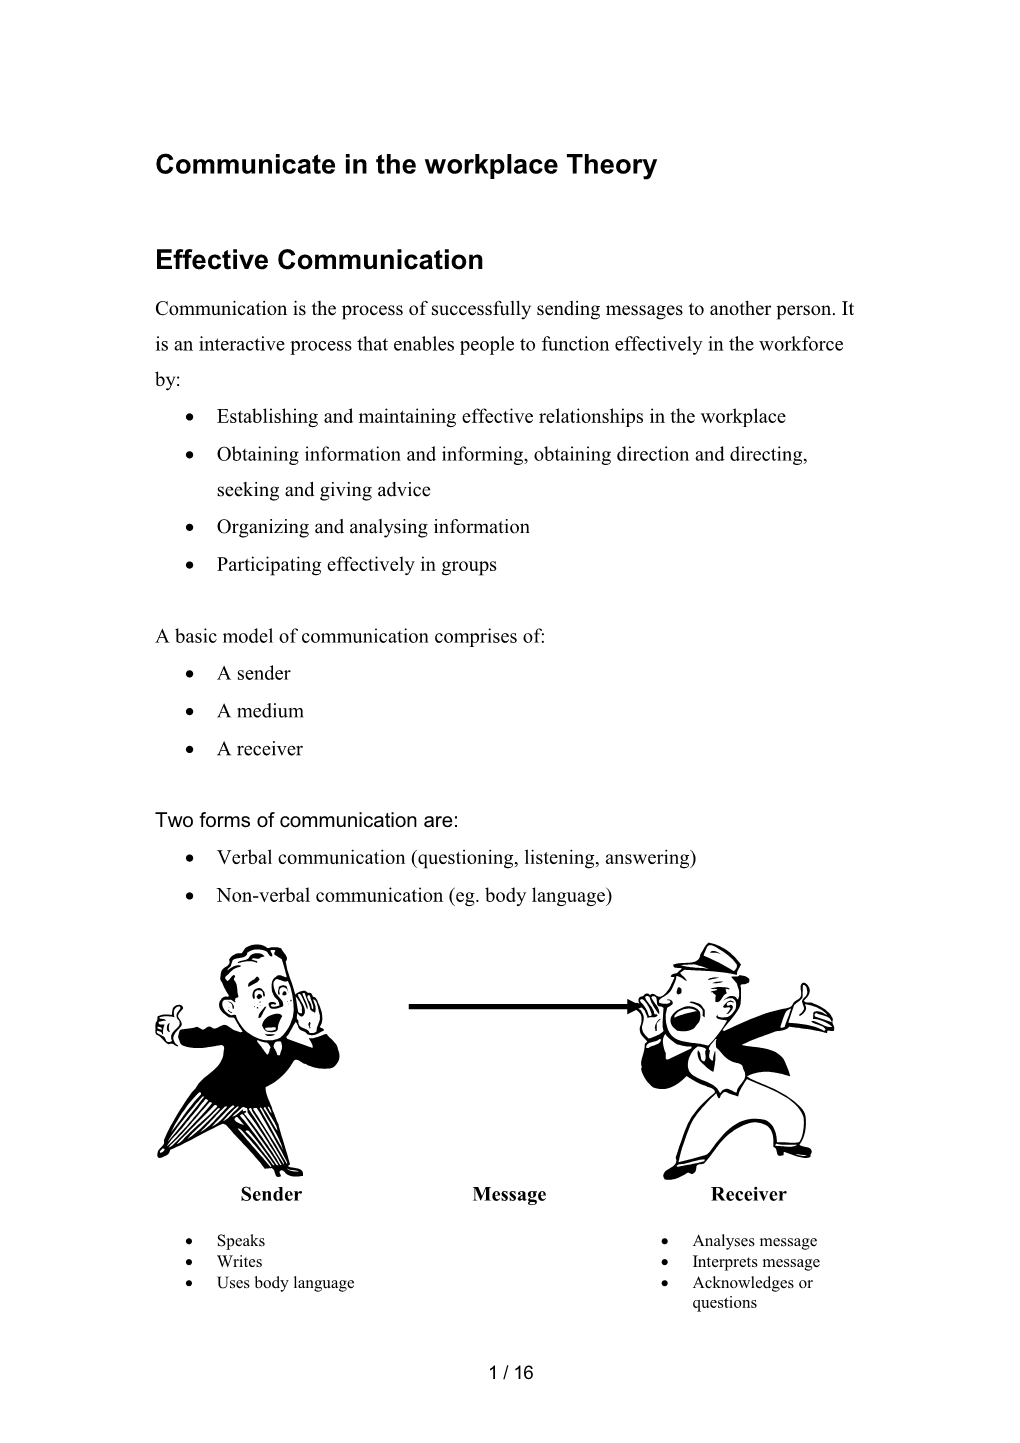 Communicate in the Workplace Theory